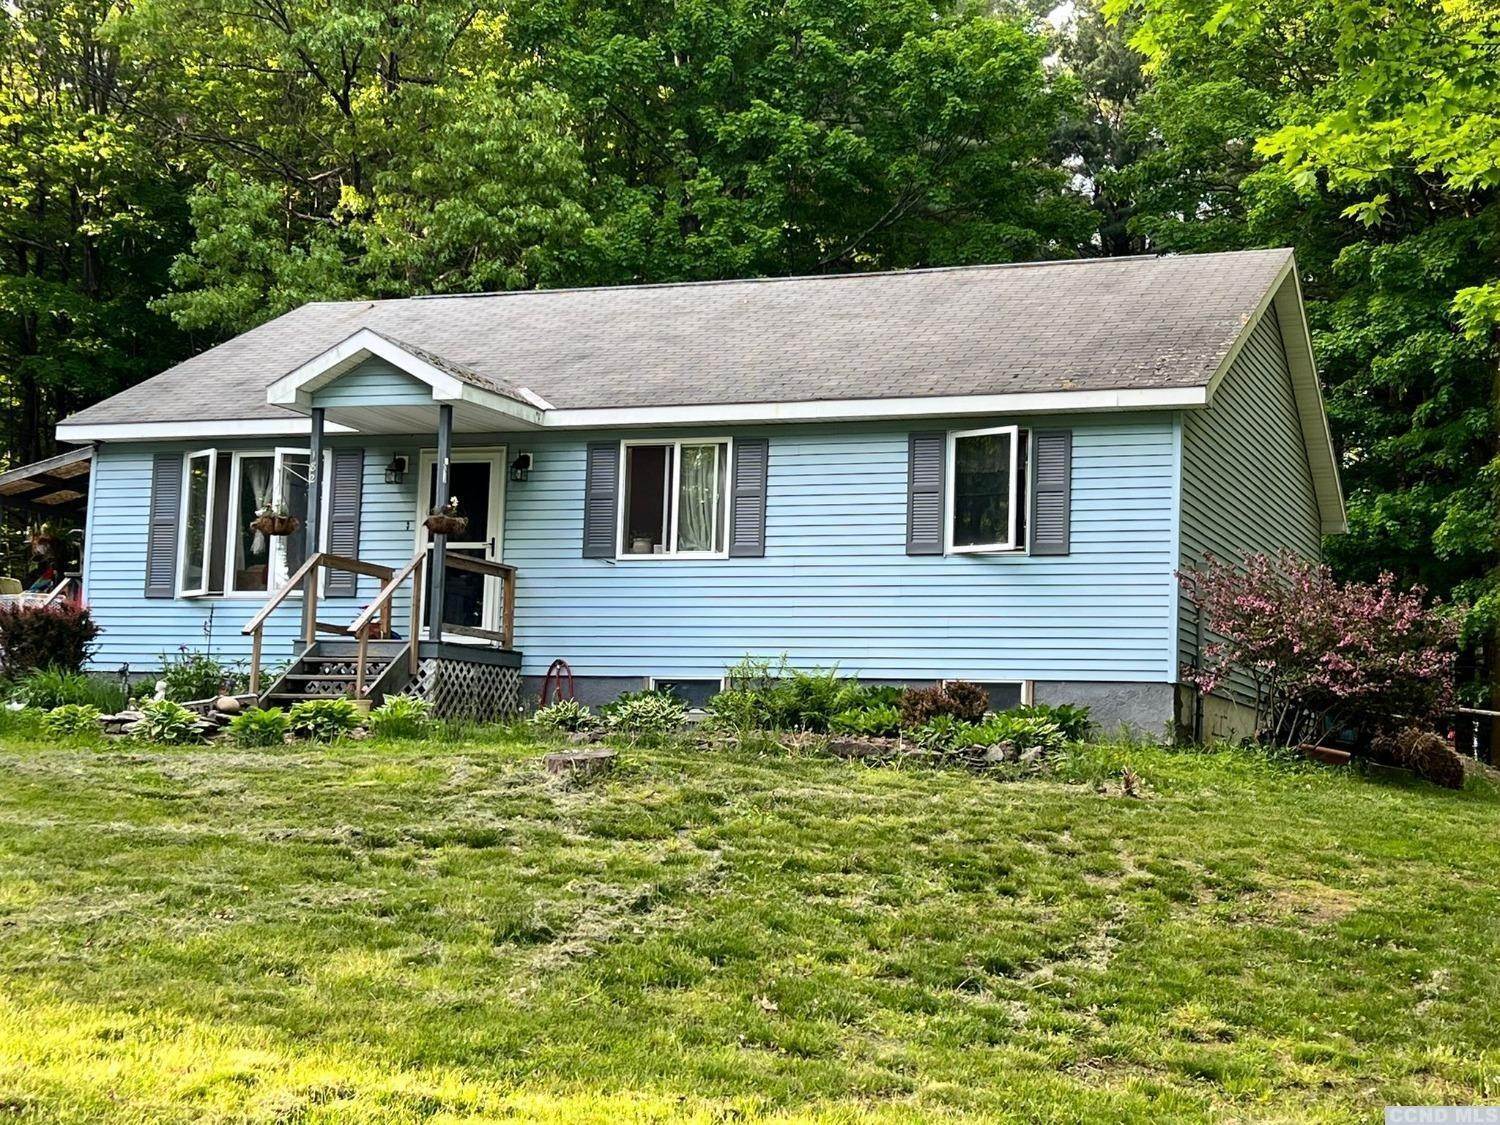 2. Single Family for Sale at Greenville, NY 12083